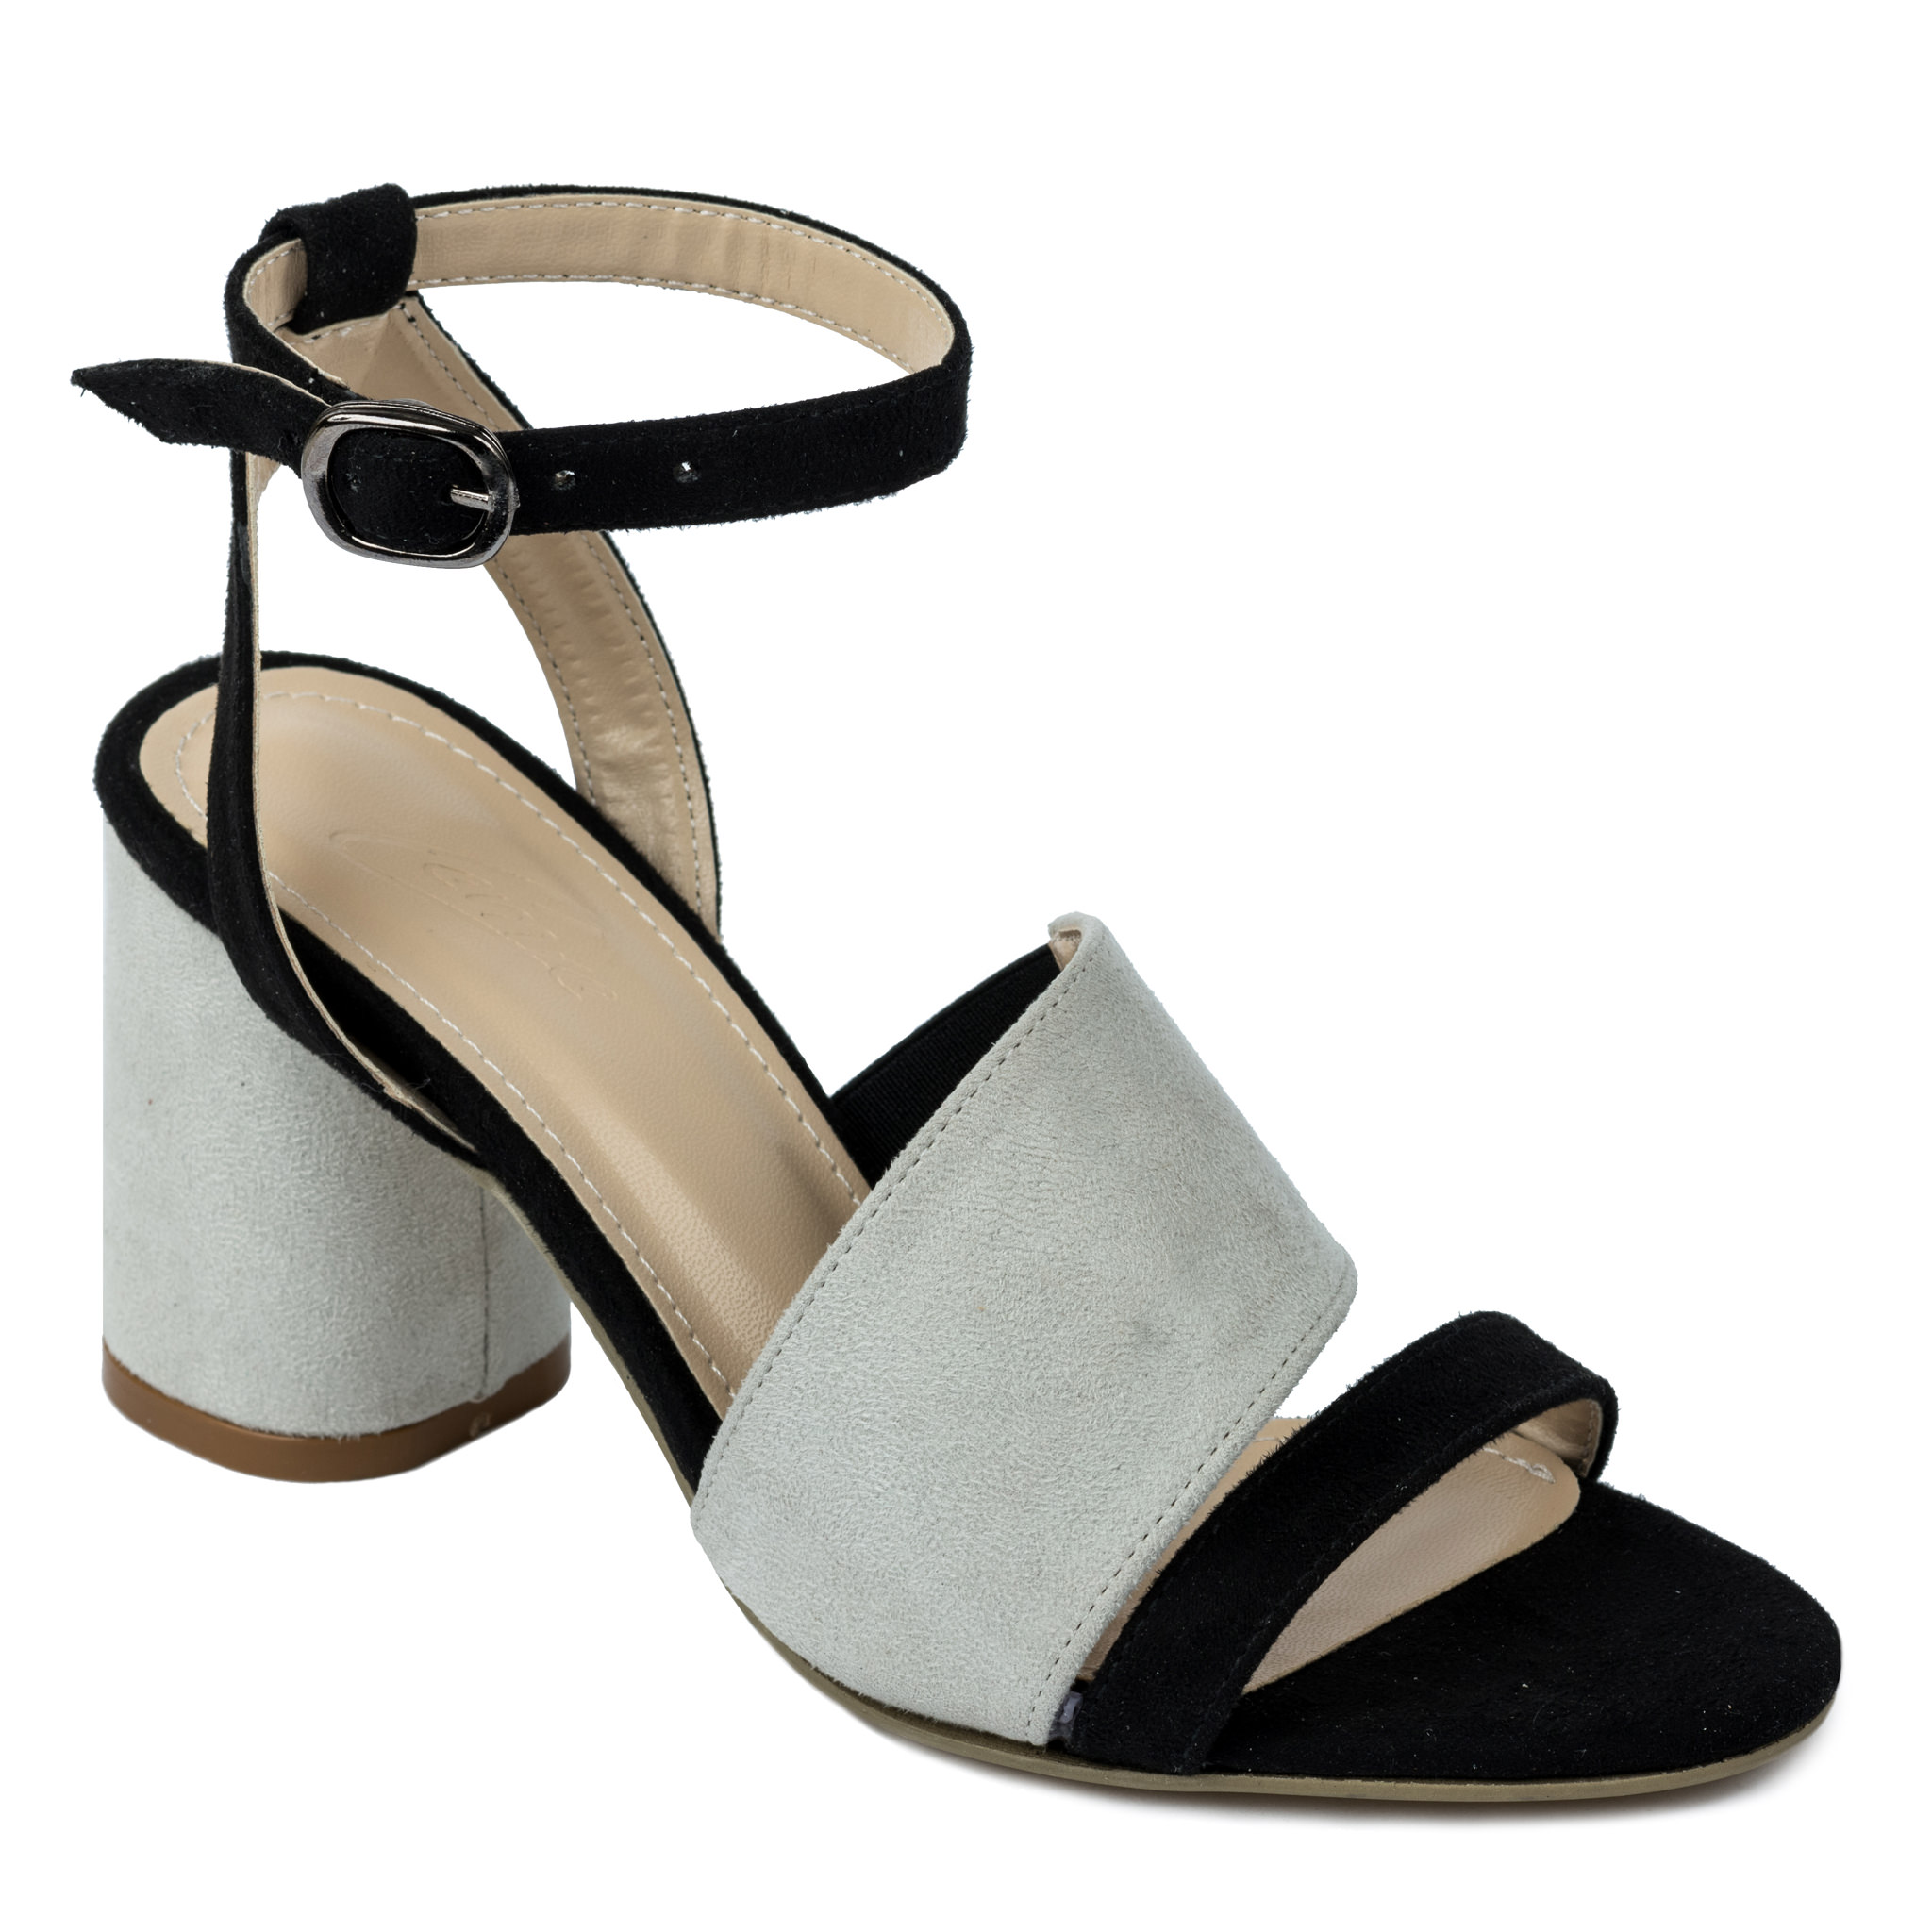 VELOUR SANDALS WITH BELTS AND BLOCK HEEL - GRAY